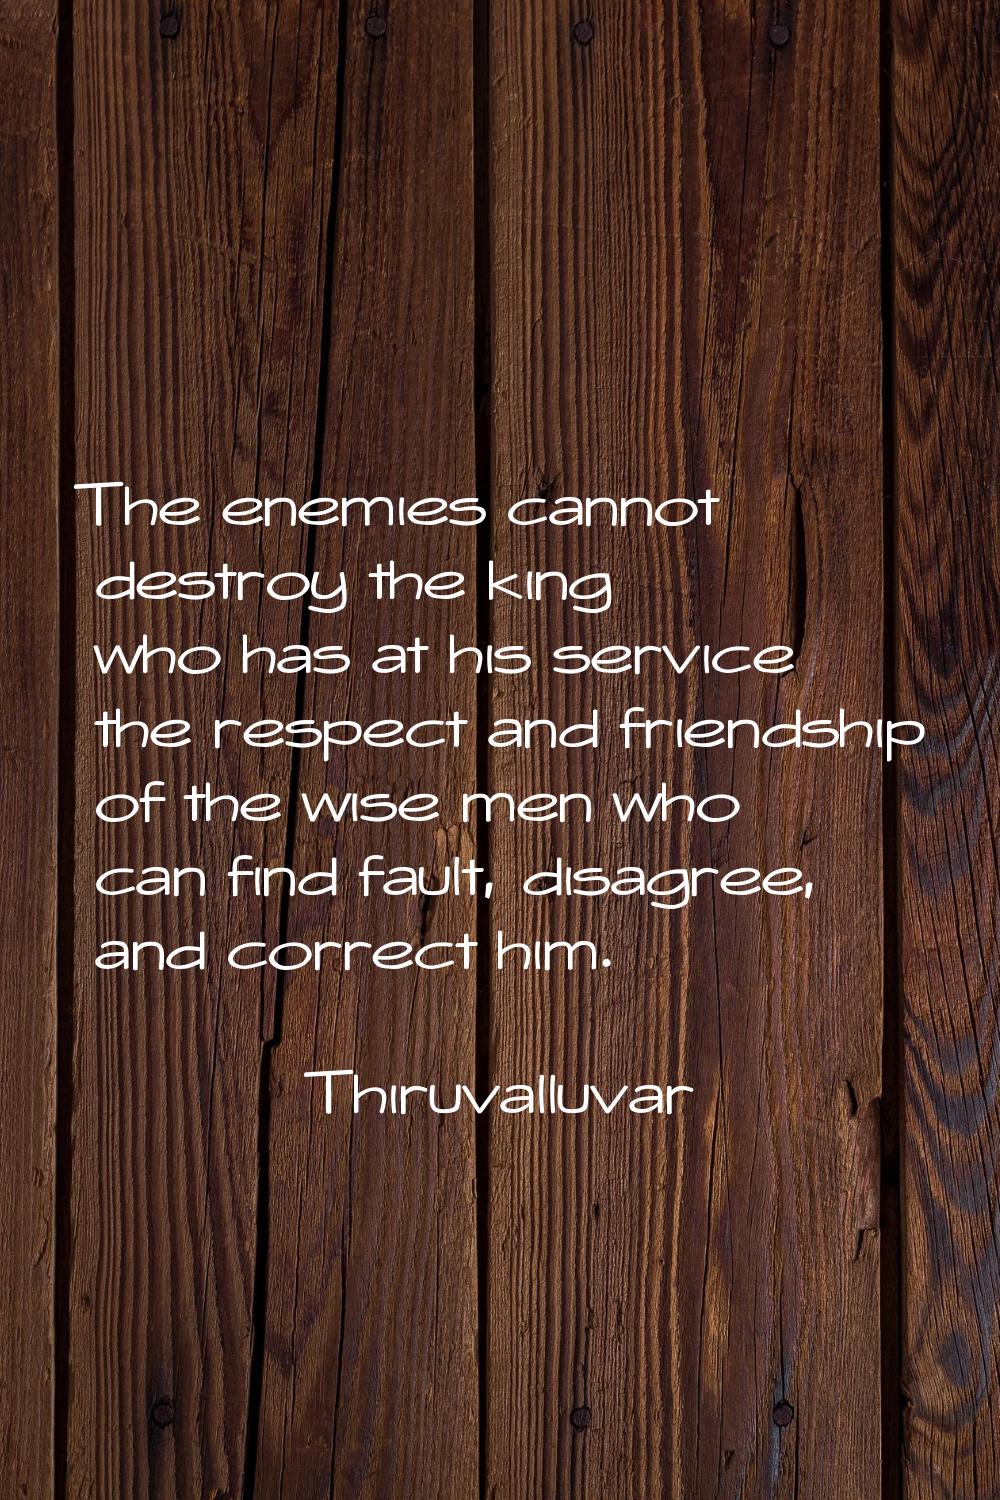 The enemies cannot destroy the king who has at his service the respect and friendship of the wise m